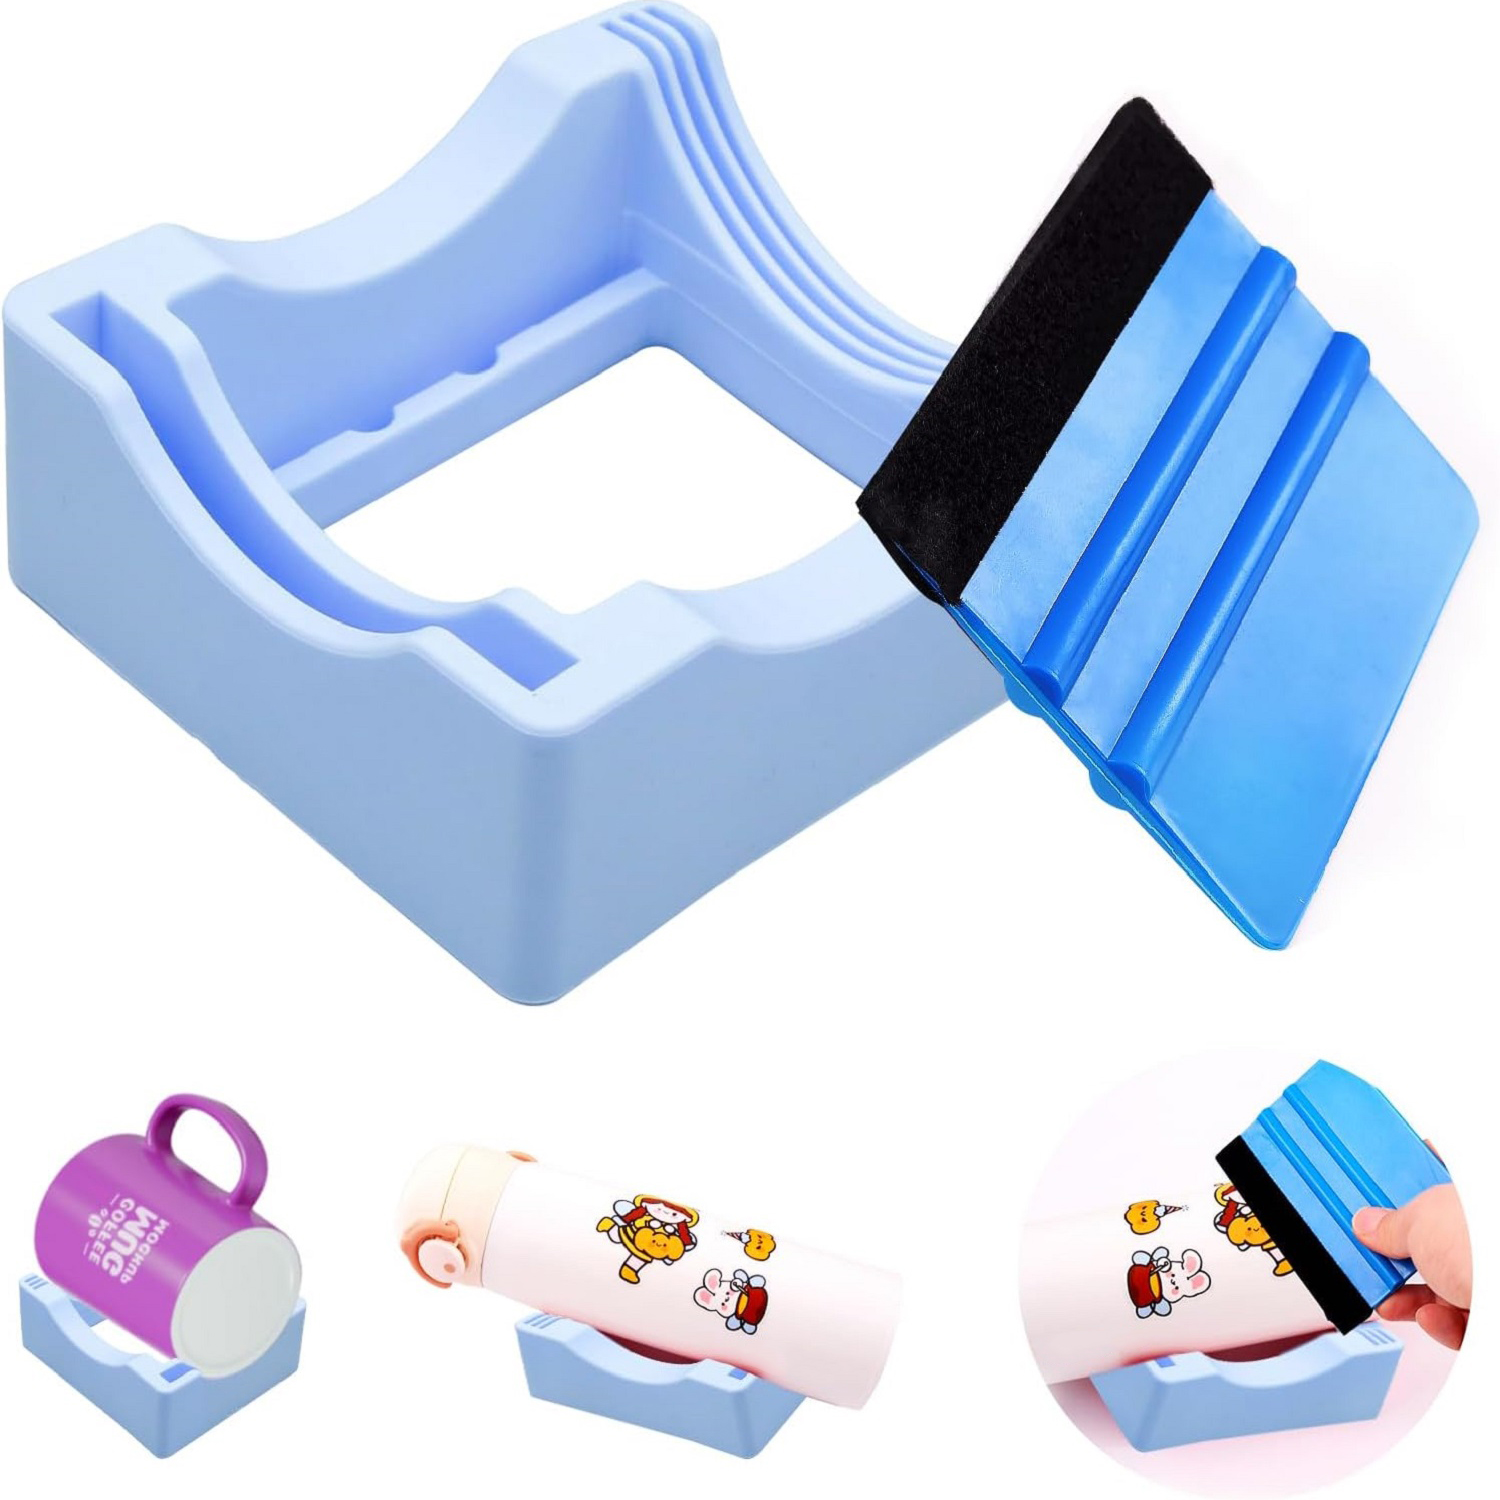 Tumbler Cradle Holder Silicone Cup Cradle With -In Slot Tumbler